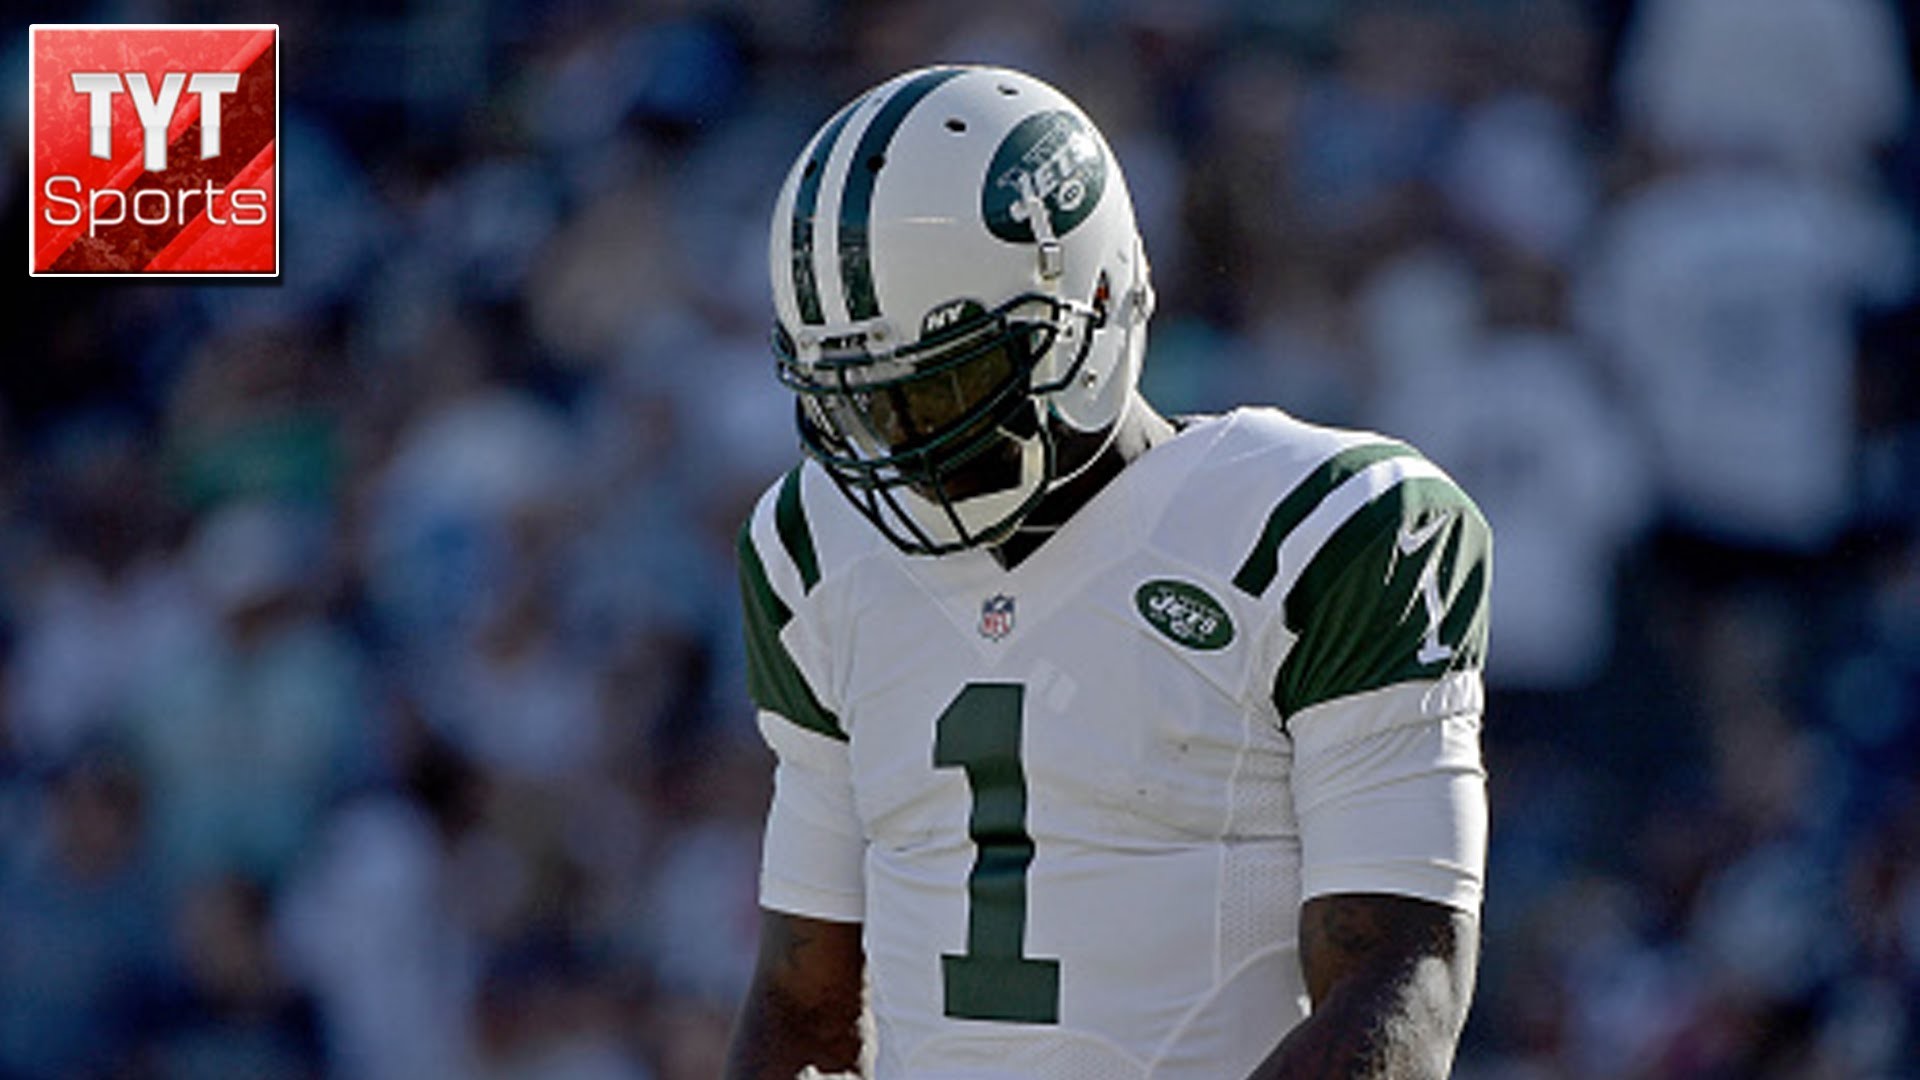 1920x1080 Michael Vick Takes Shot at Geno Smith, Jets Crushed by Chargers - YouTube